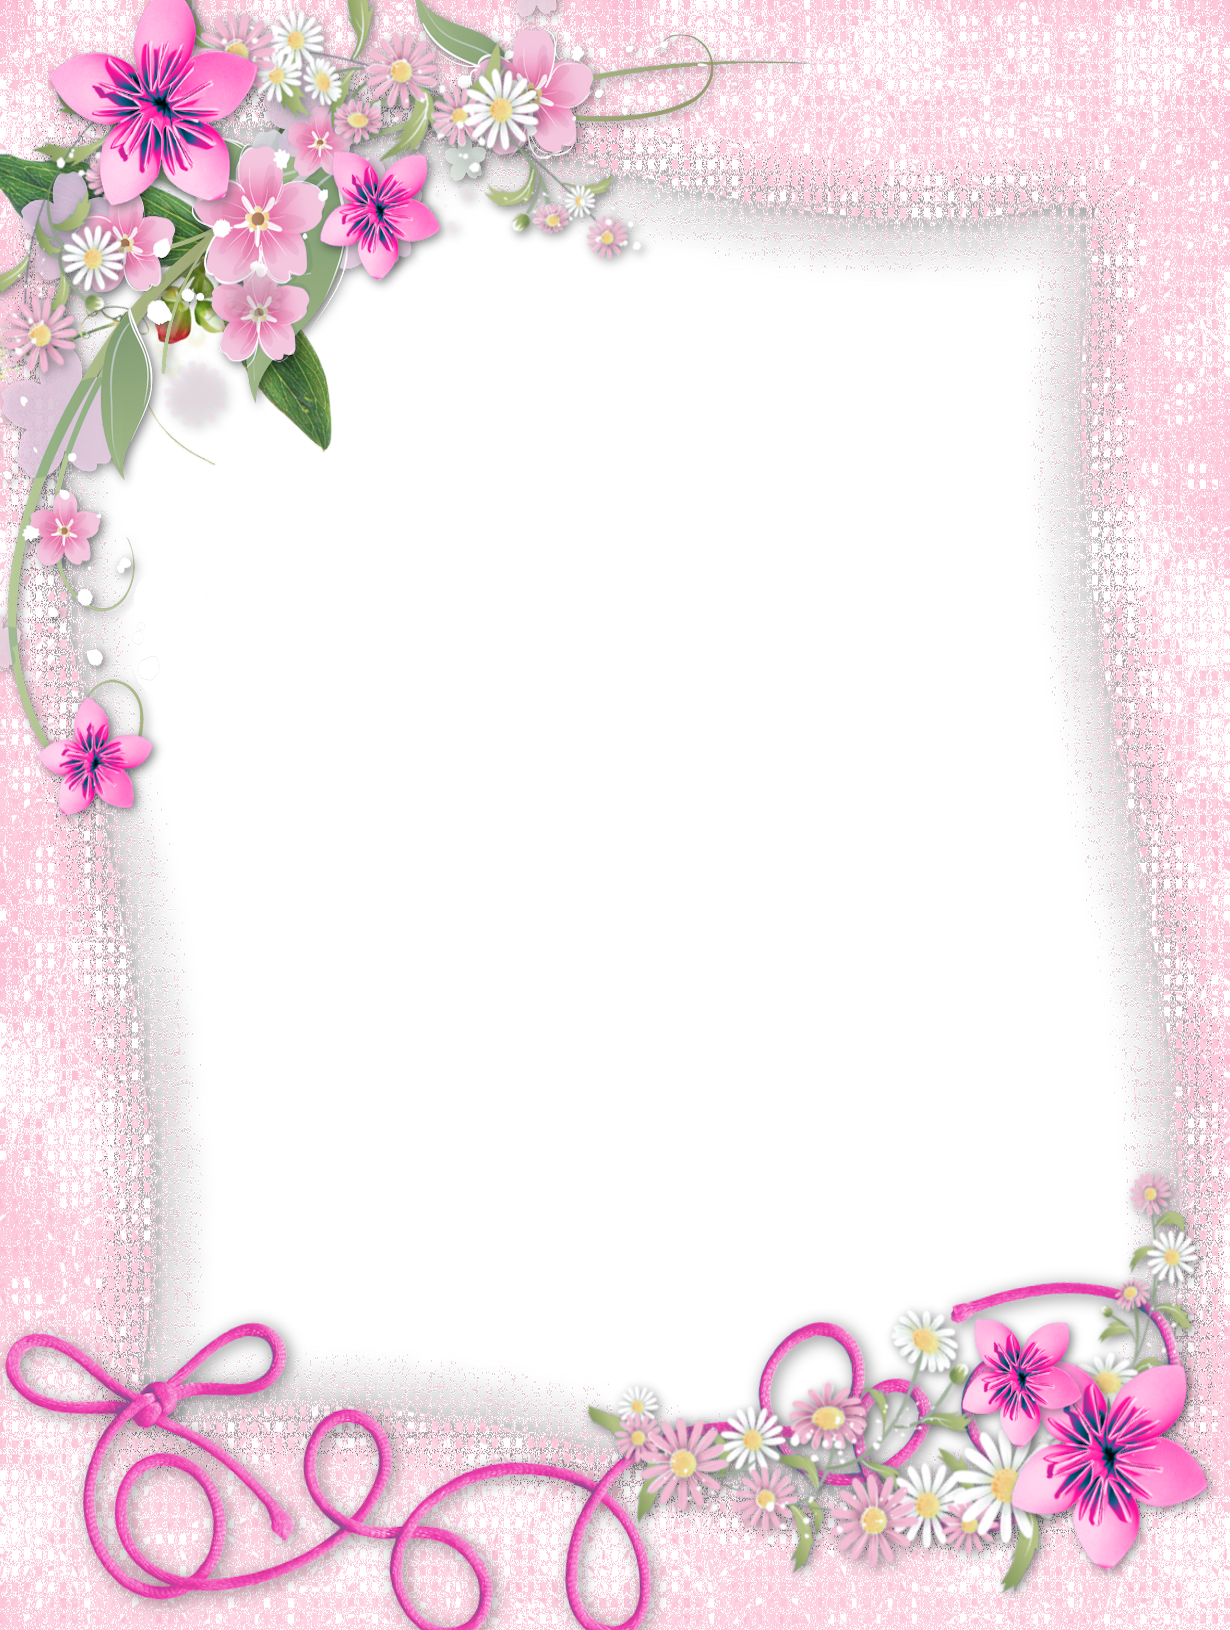 transparent pink png frame with flowers gallery yopriceville high quality images and transparent png free clipart transparent pink png frame with flowers